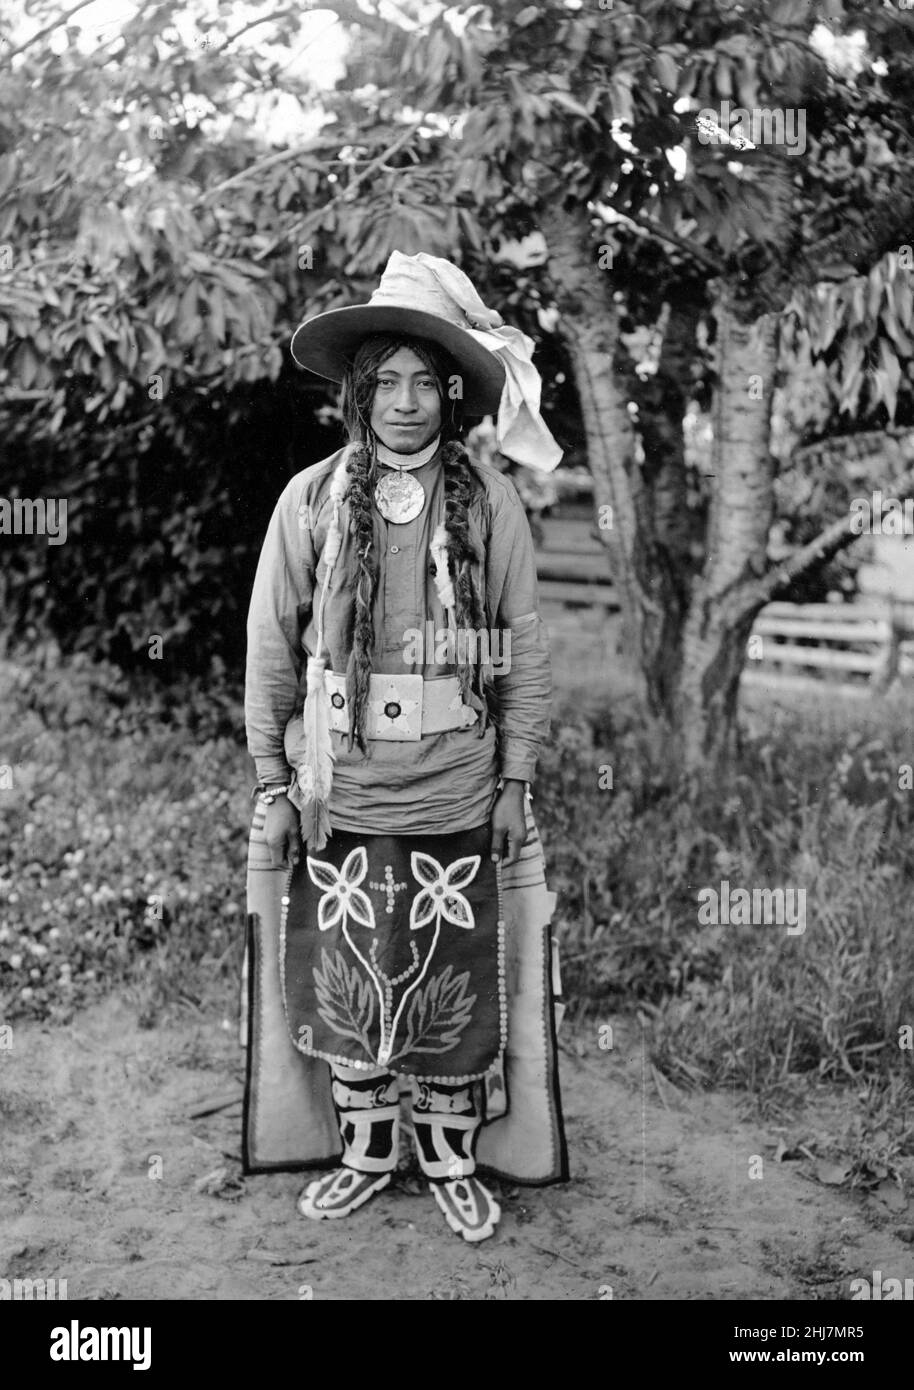 Antique and vintage photo - Native american / Indian / American Indian man from the Plateau region. 1910. Stock Photo